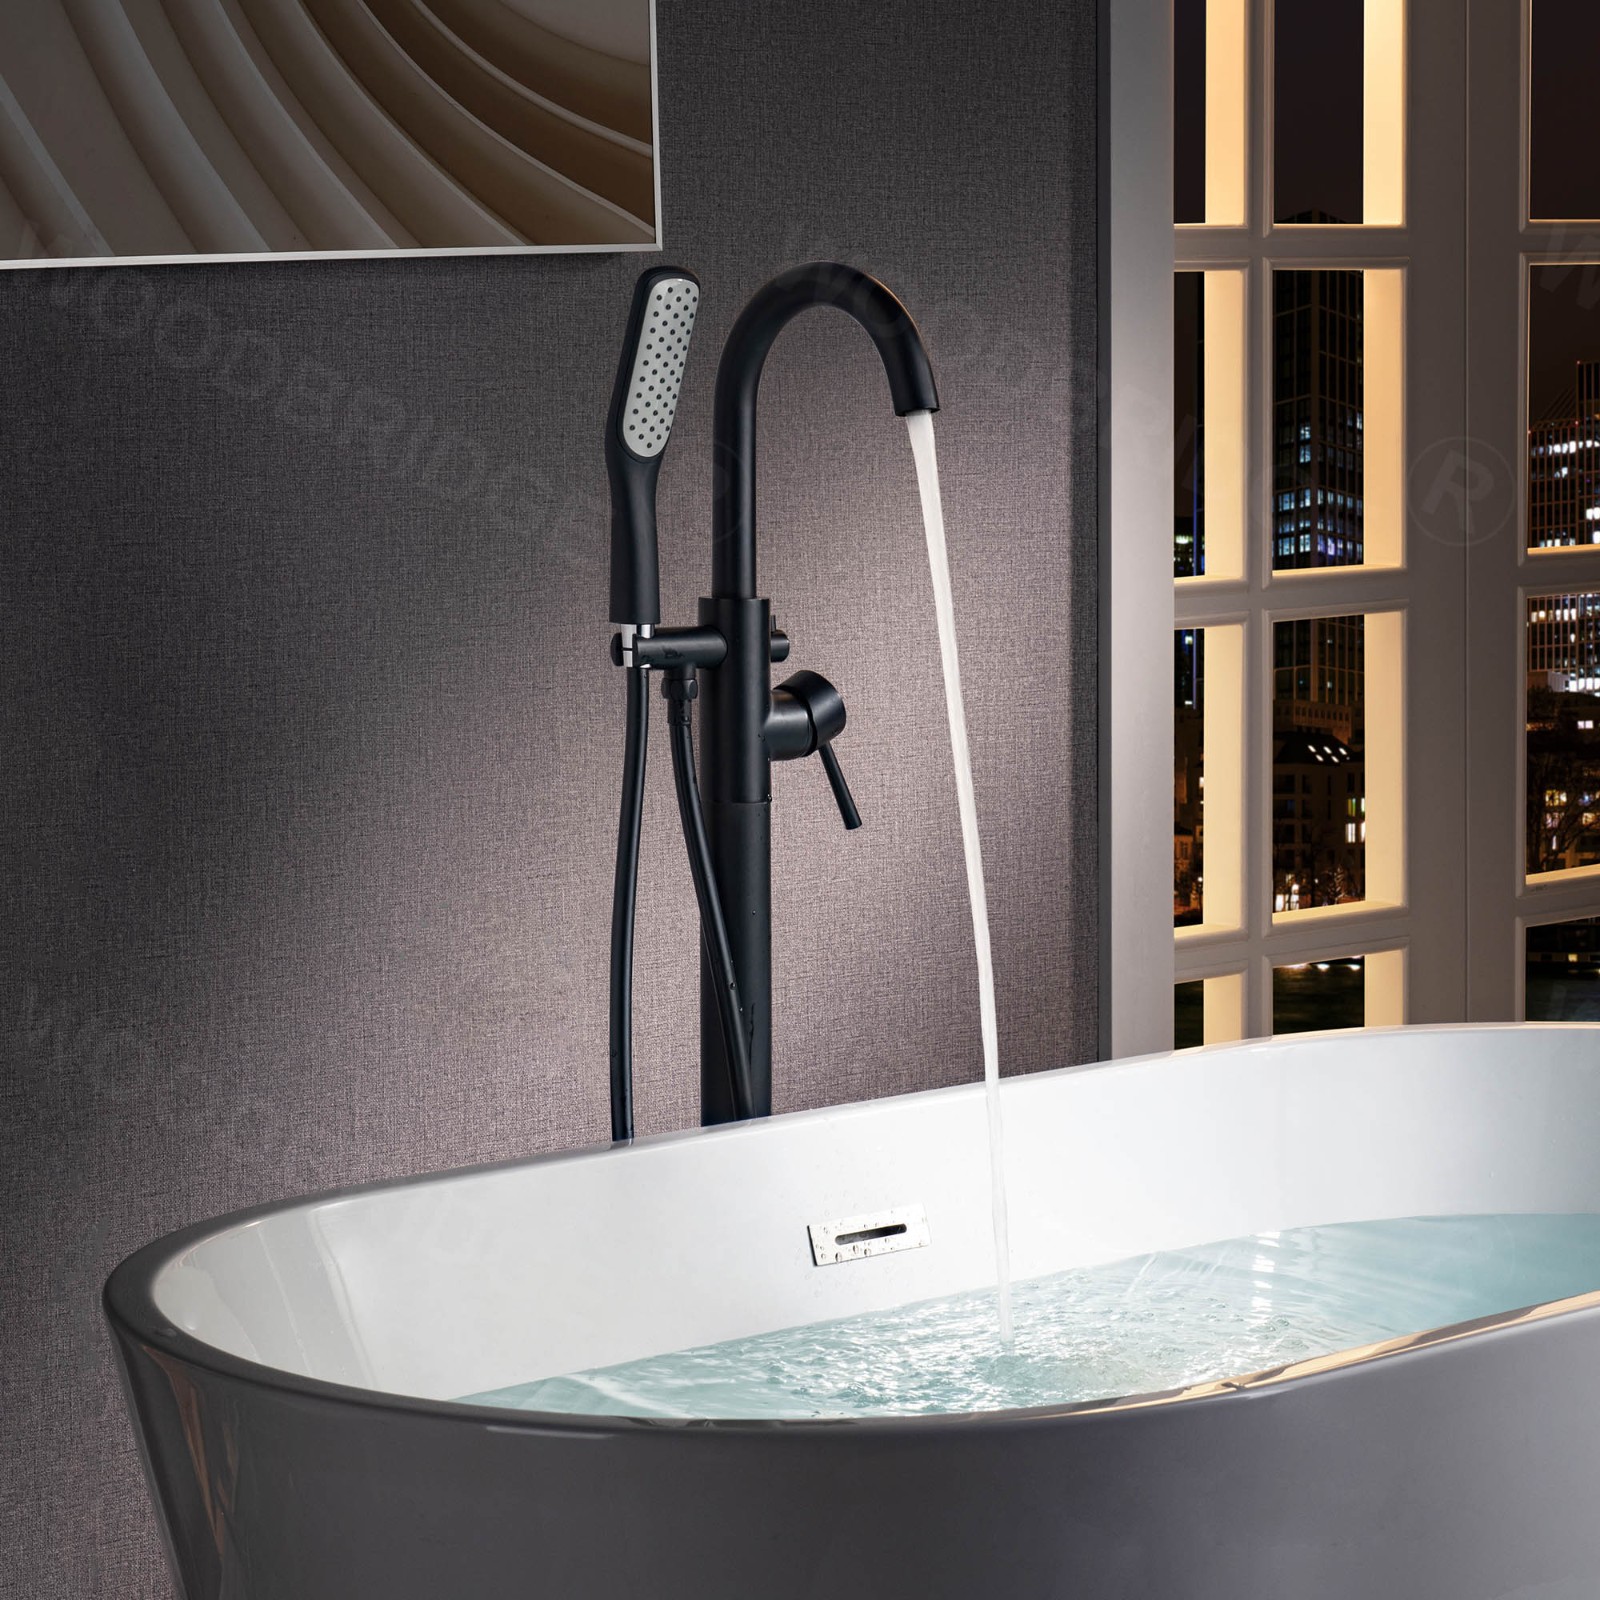  WOODBRIDGE F0025MBSQ Fusion Single Handle Floor Mount Freestanding Tub Filler Faucet with Square Comfort Grip Hand Shower in Matte Black Finish._5268